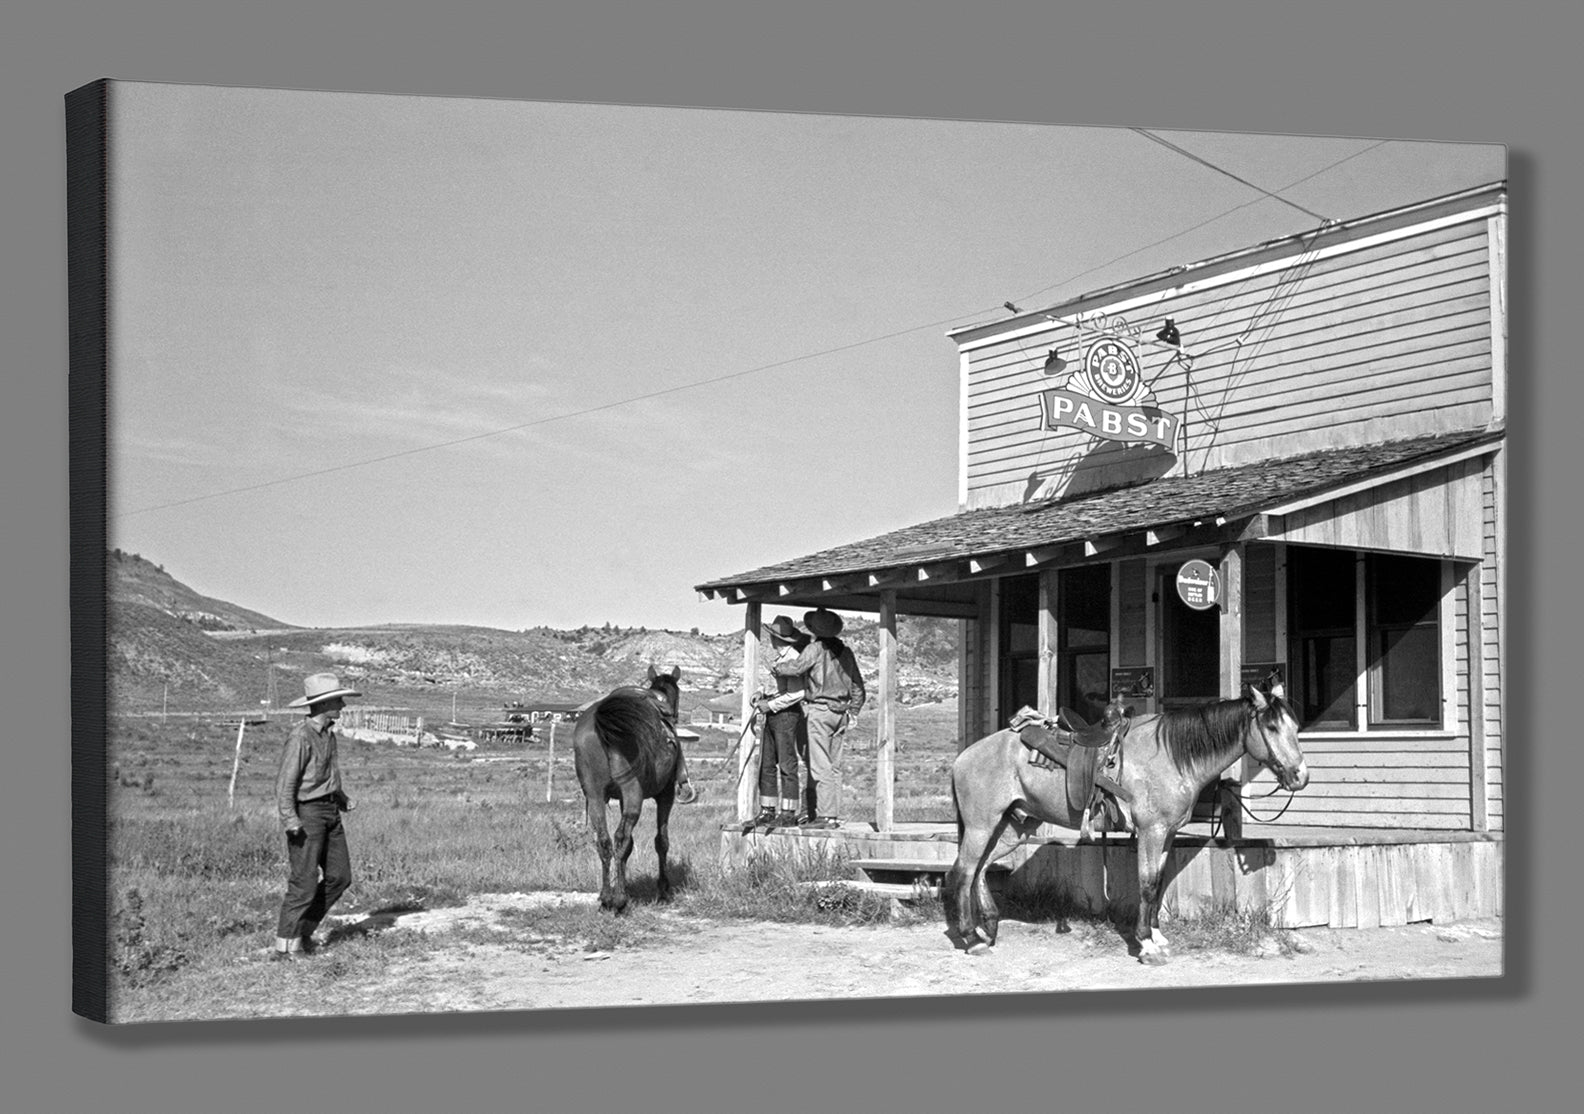 A canvas print reproduction of a vintage photograph of a beer parlor in Montana